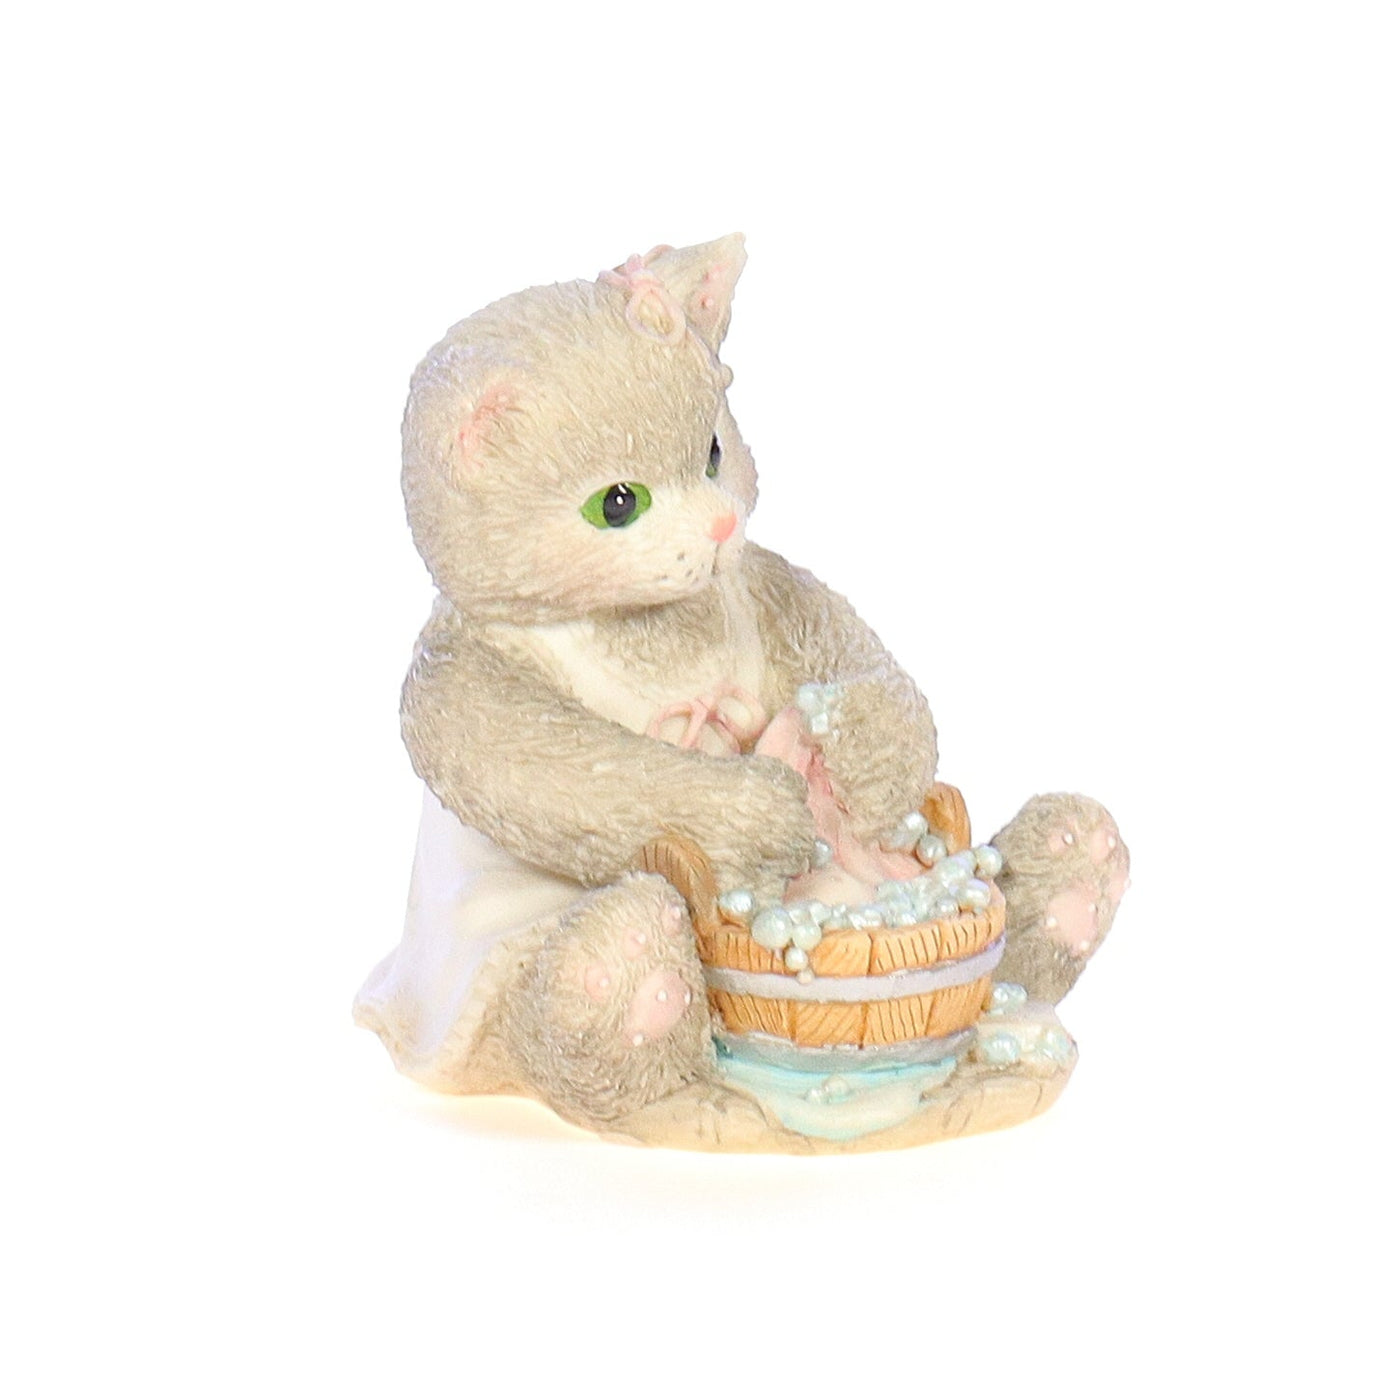 Calico_Kittens_Good_As_New_Family_Figurine_1994